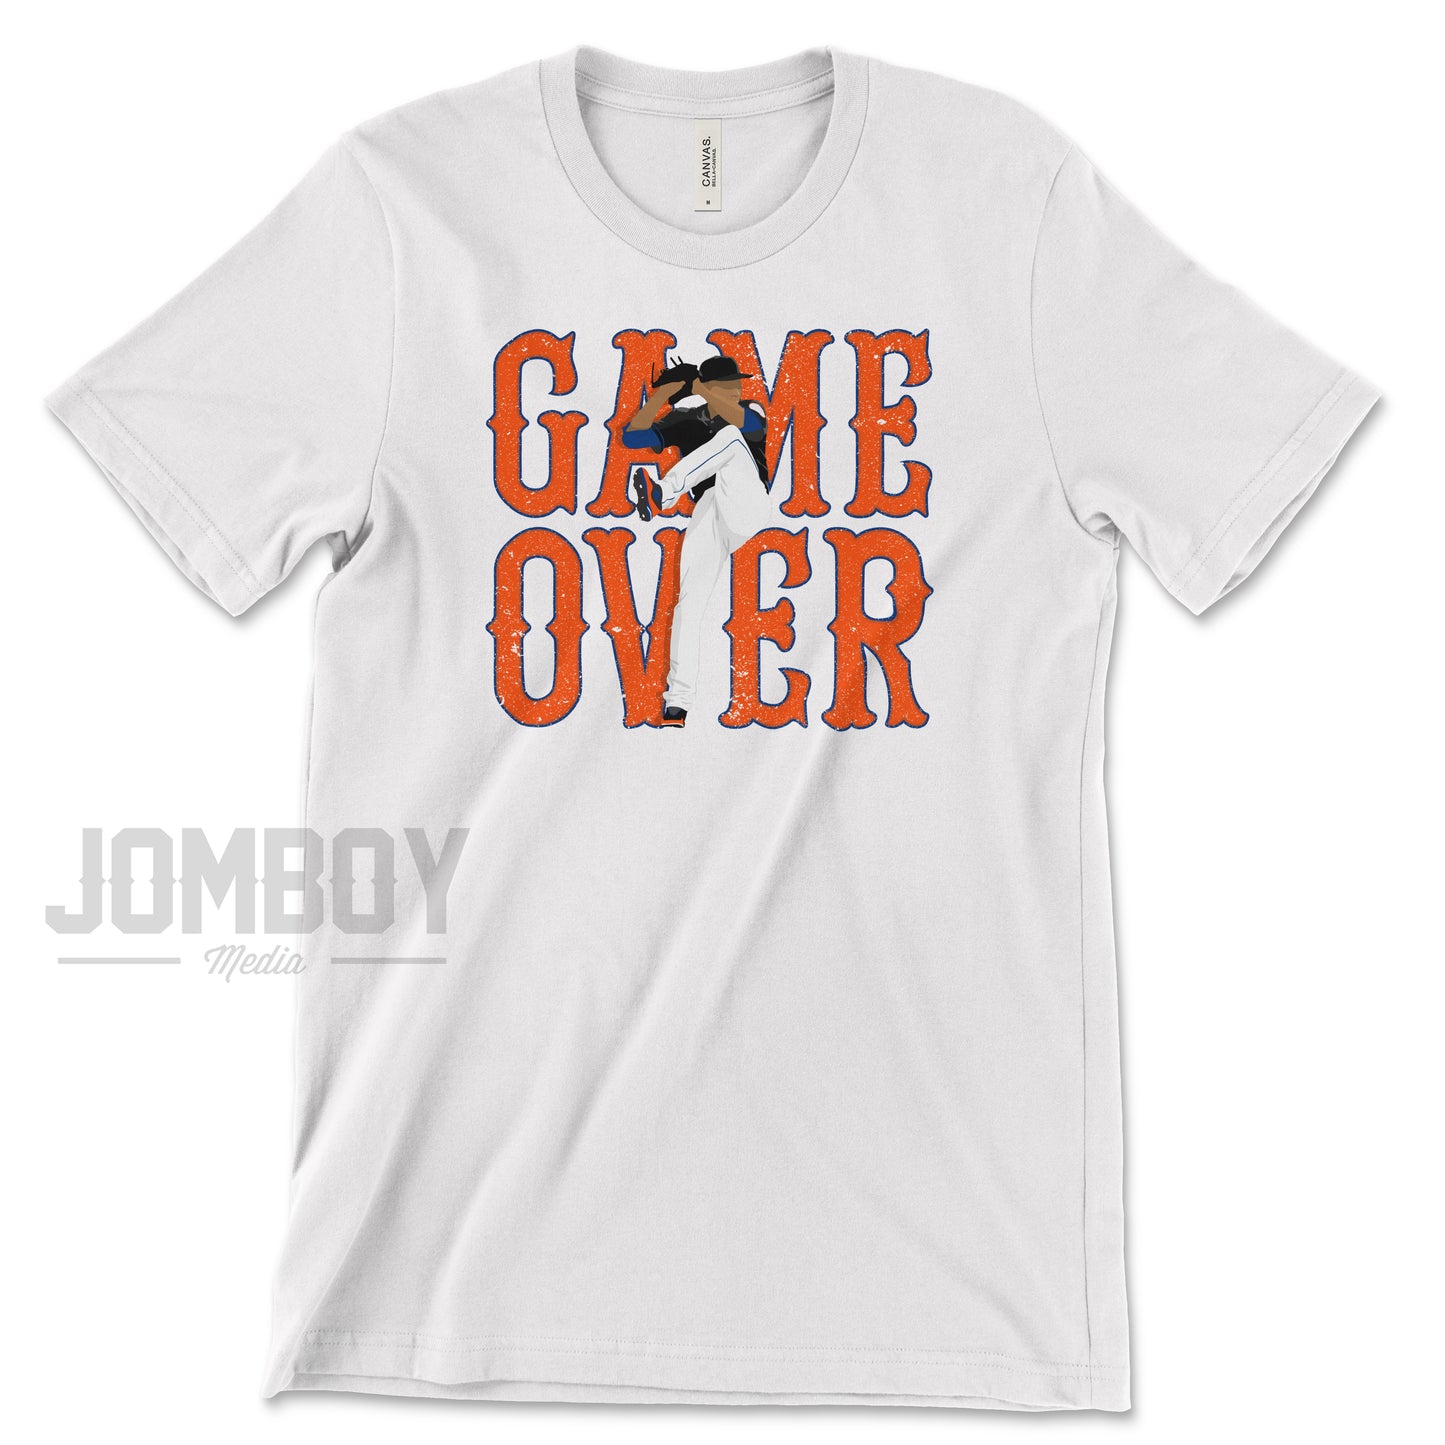 Game Over | T-Shirt